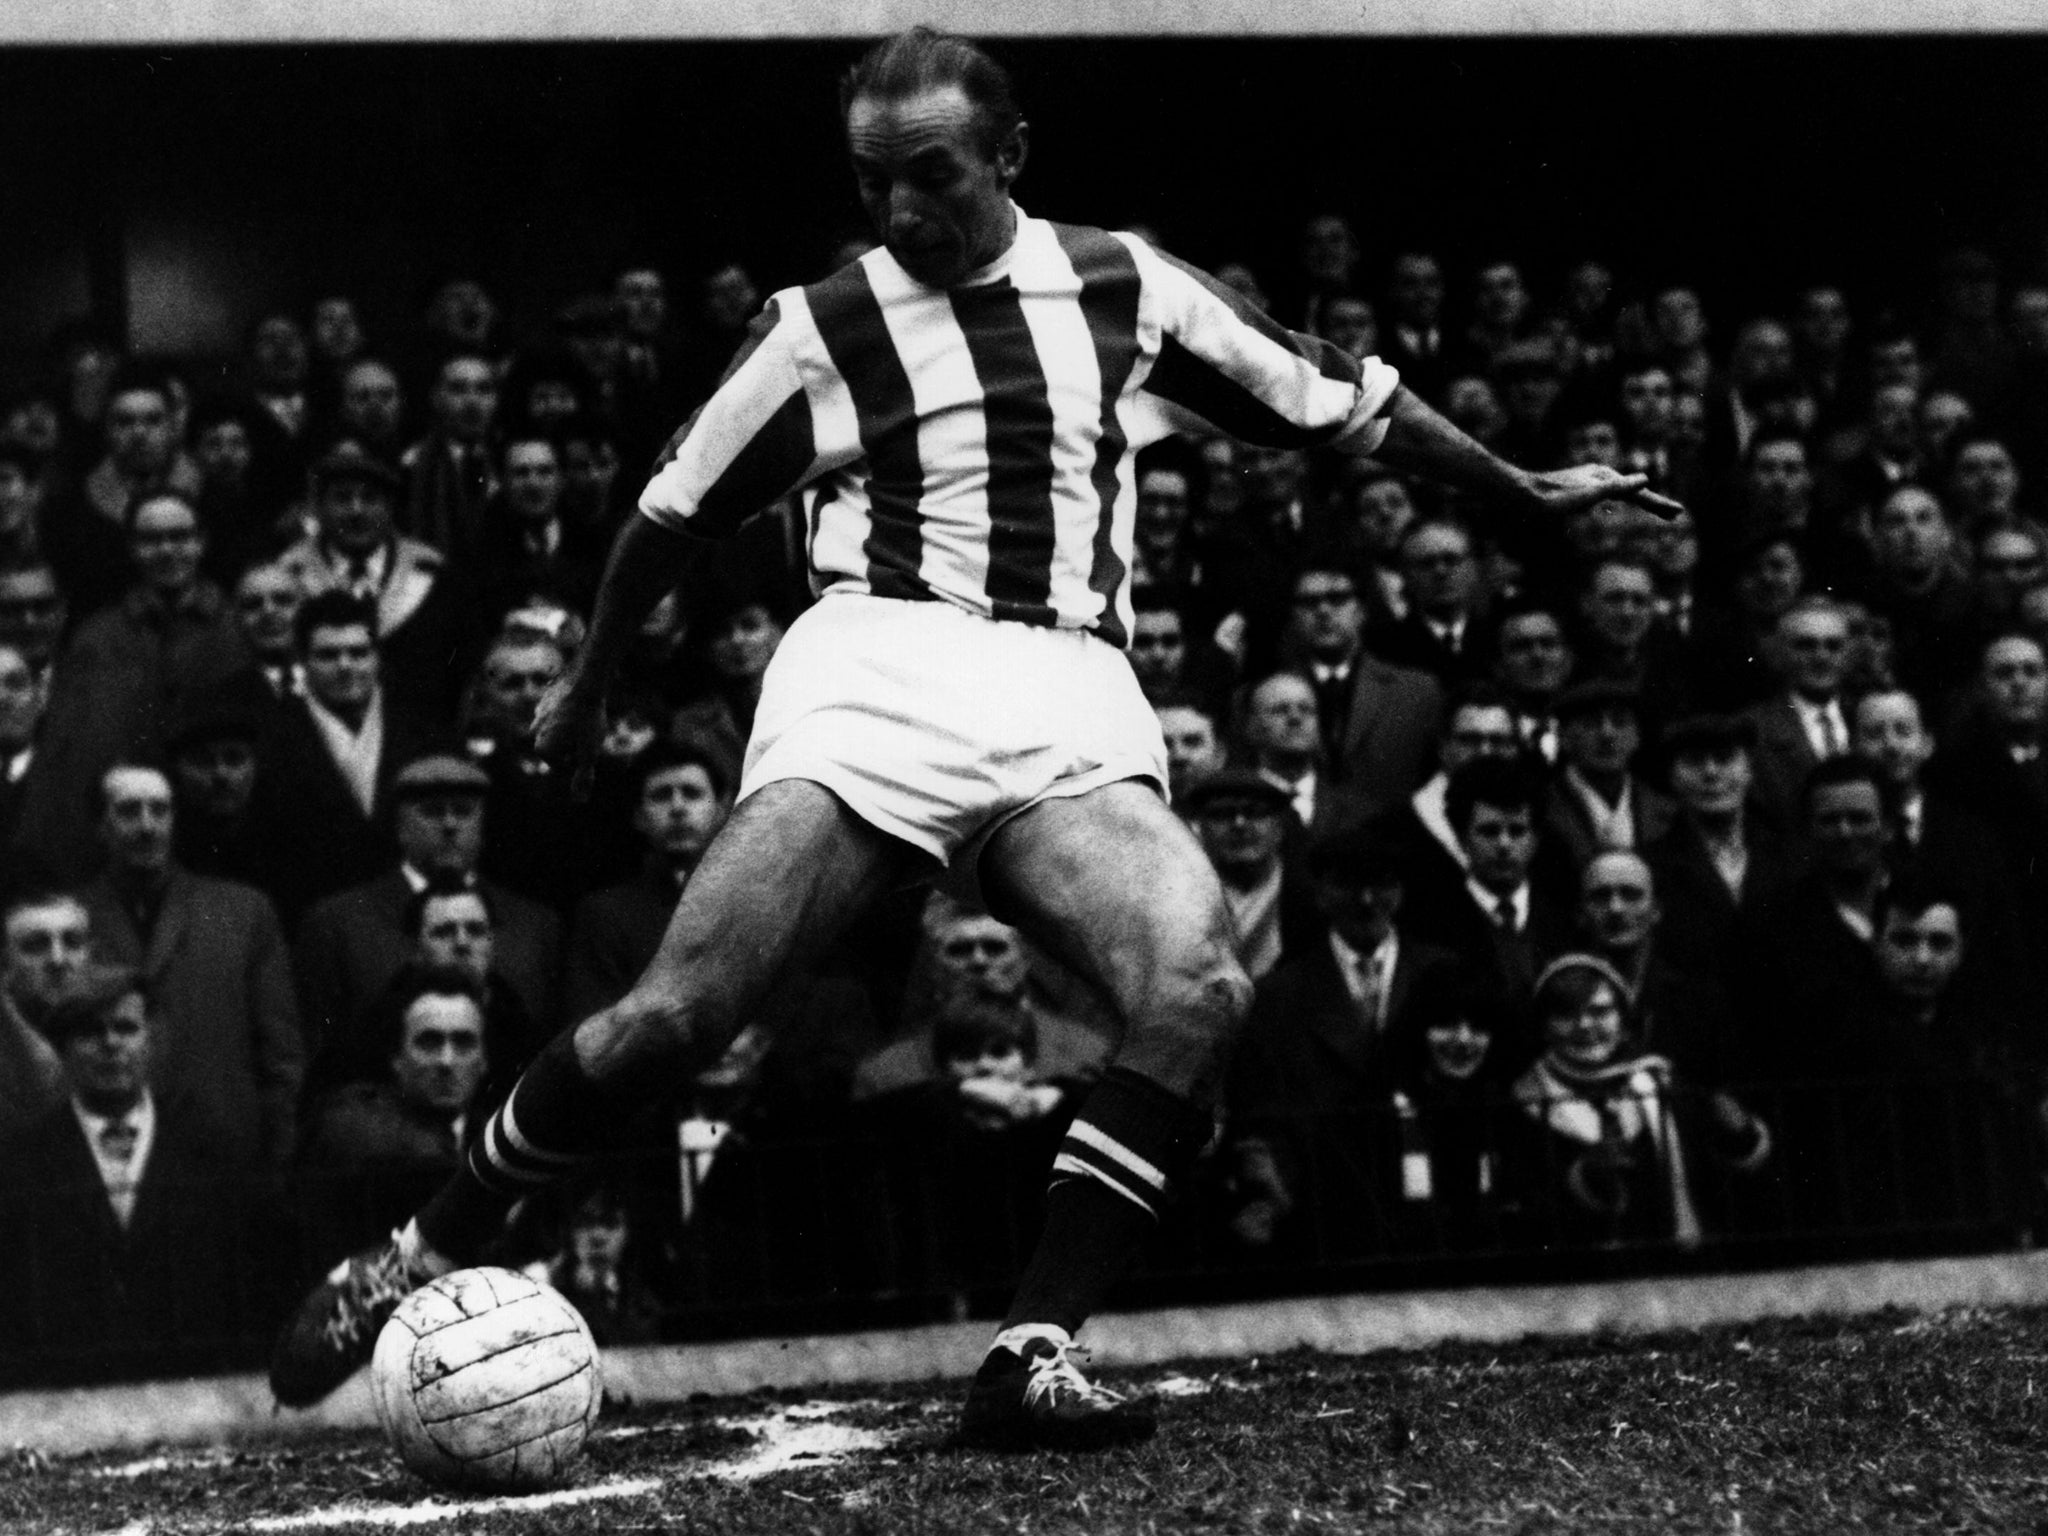 &#13;
Stanley Matthews was 50 when he played for Stoke in the First Division in 1965&#13;